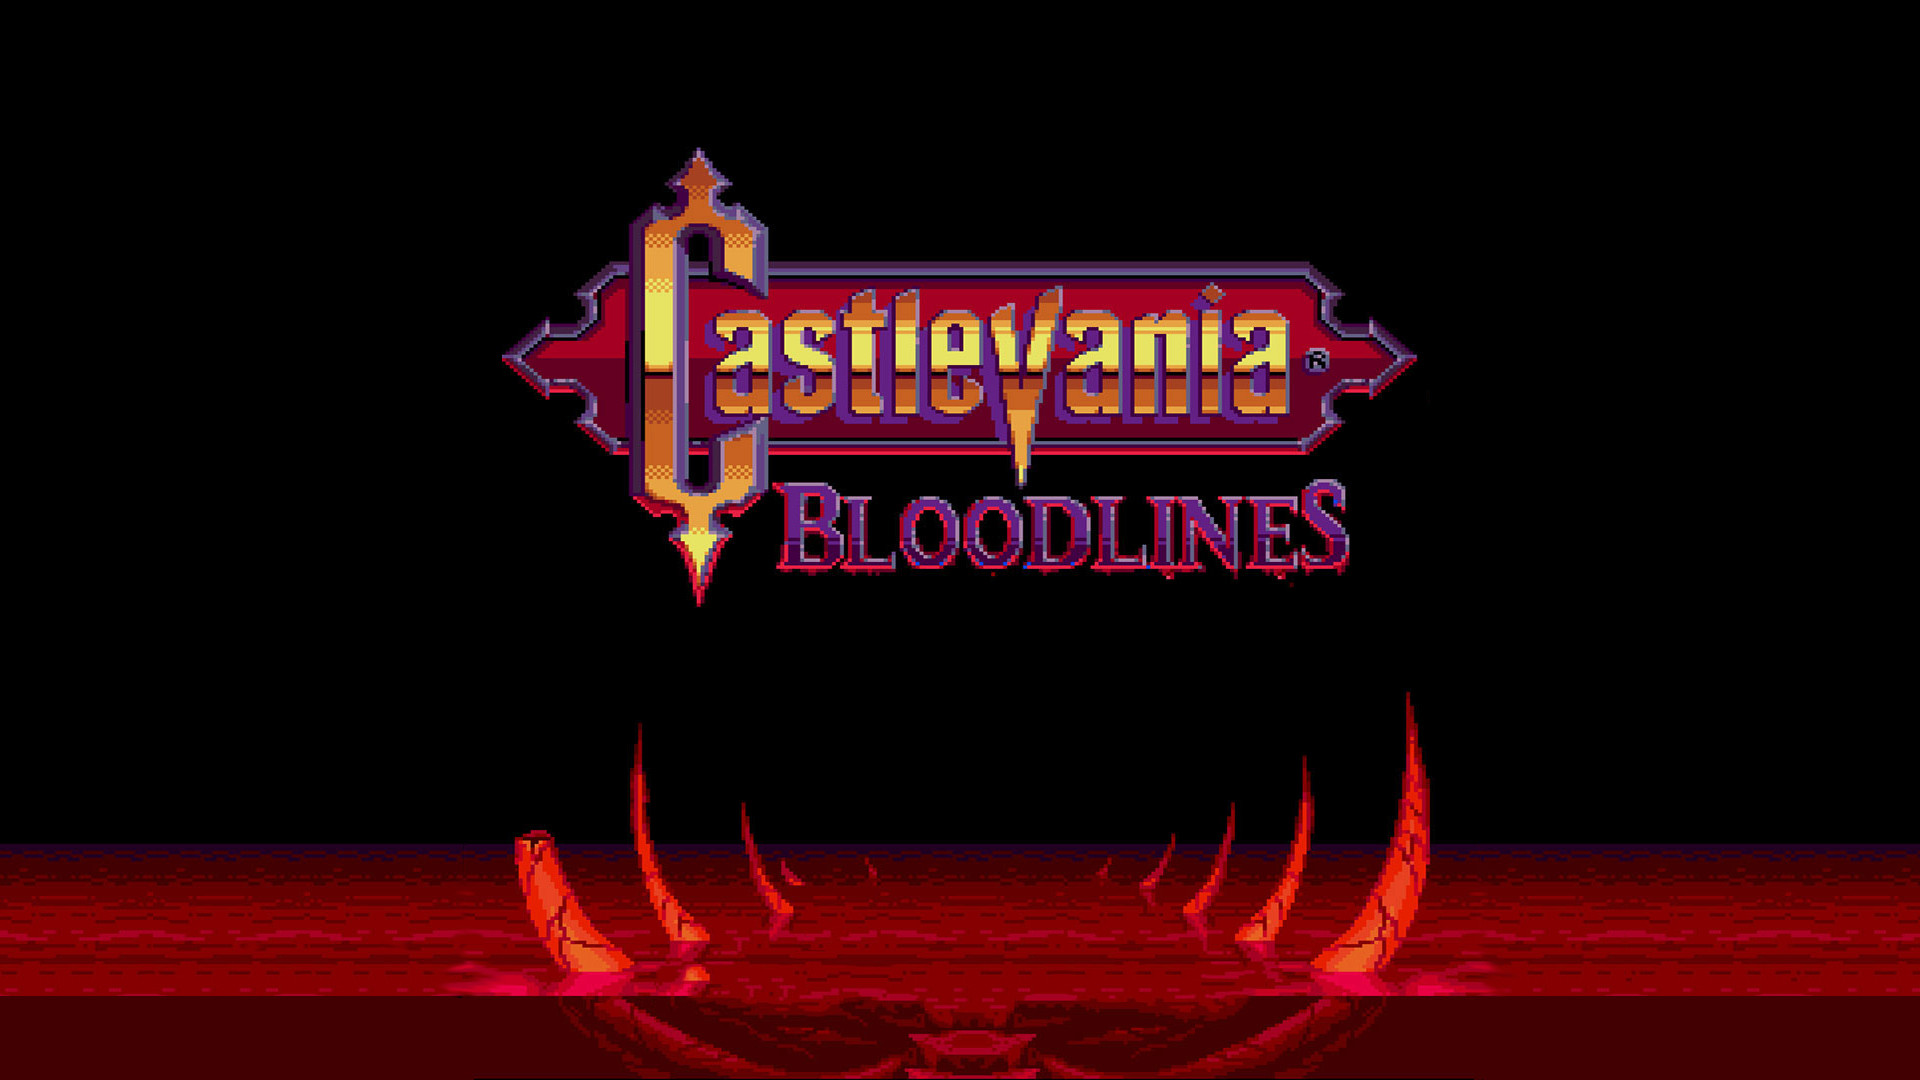 1920x1080 3 Castlevania: Bloodlines HD Wallpapers | Backgrounds - Wallpaper Abyss